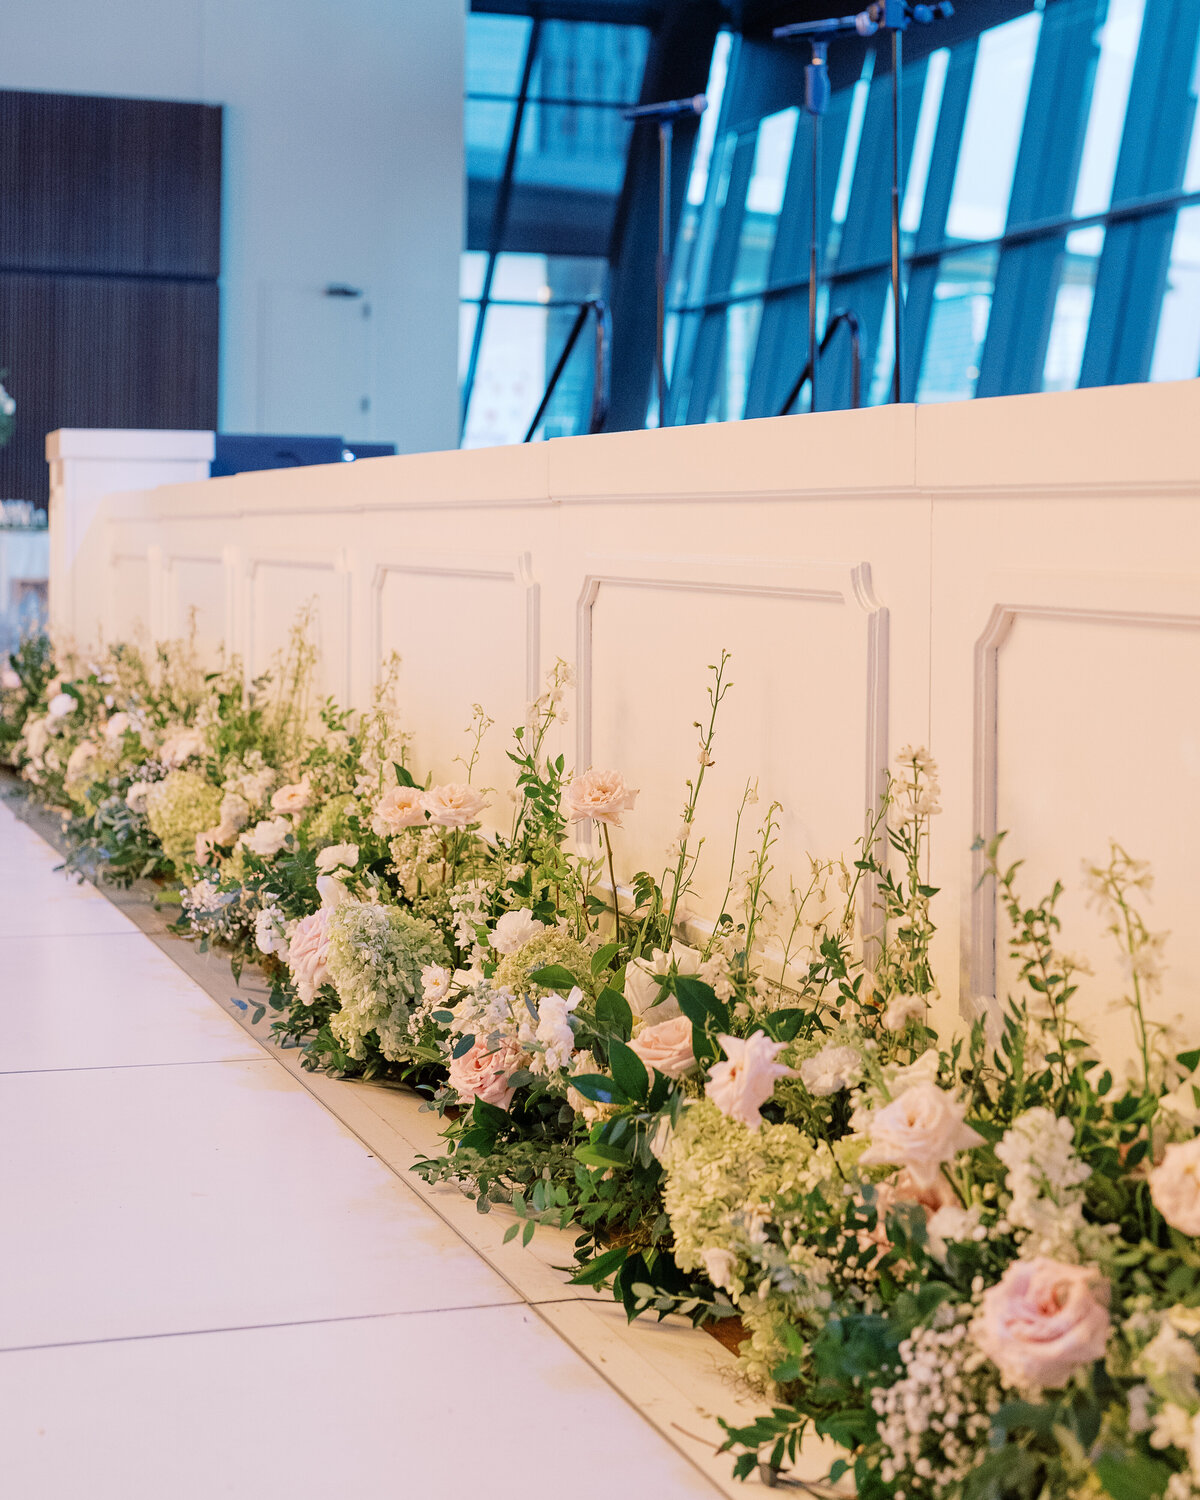 Garden-inspired floral meadows line the front of the stage. Timeless floral design for this garden-inspired floral design. Meadows with roses, baby’s breath, hydrangea, and greenery. Design by Rosemary & Finch Floral Design.